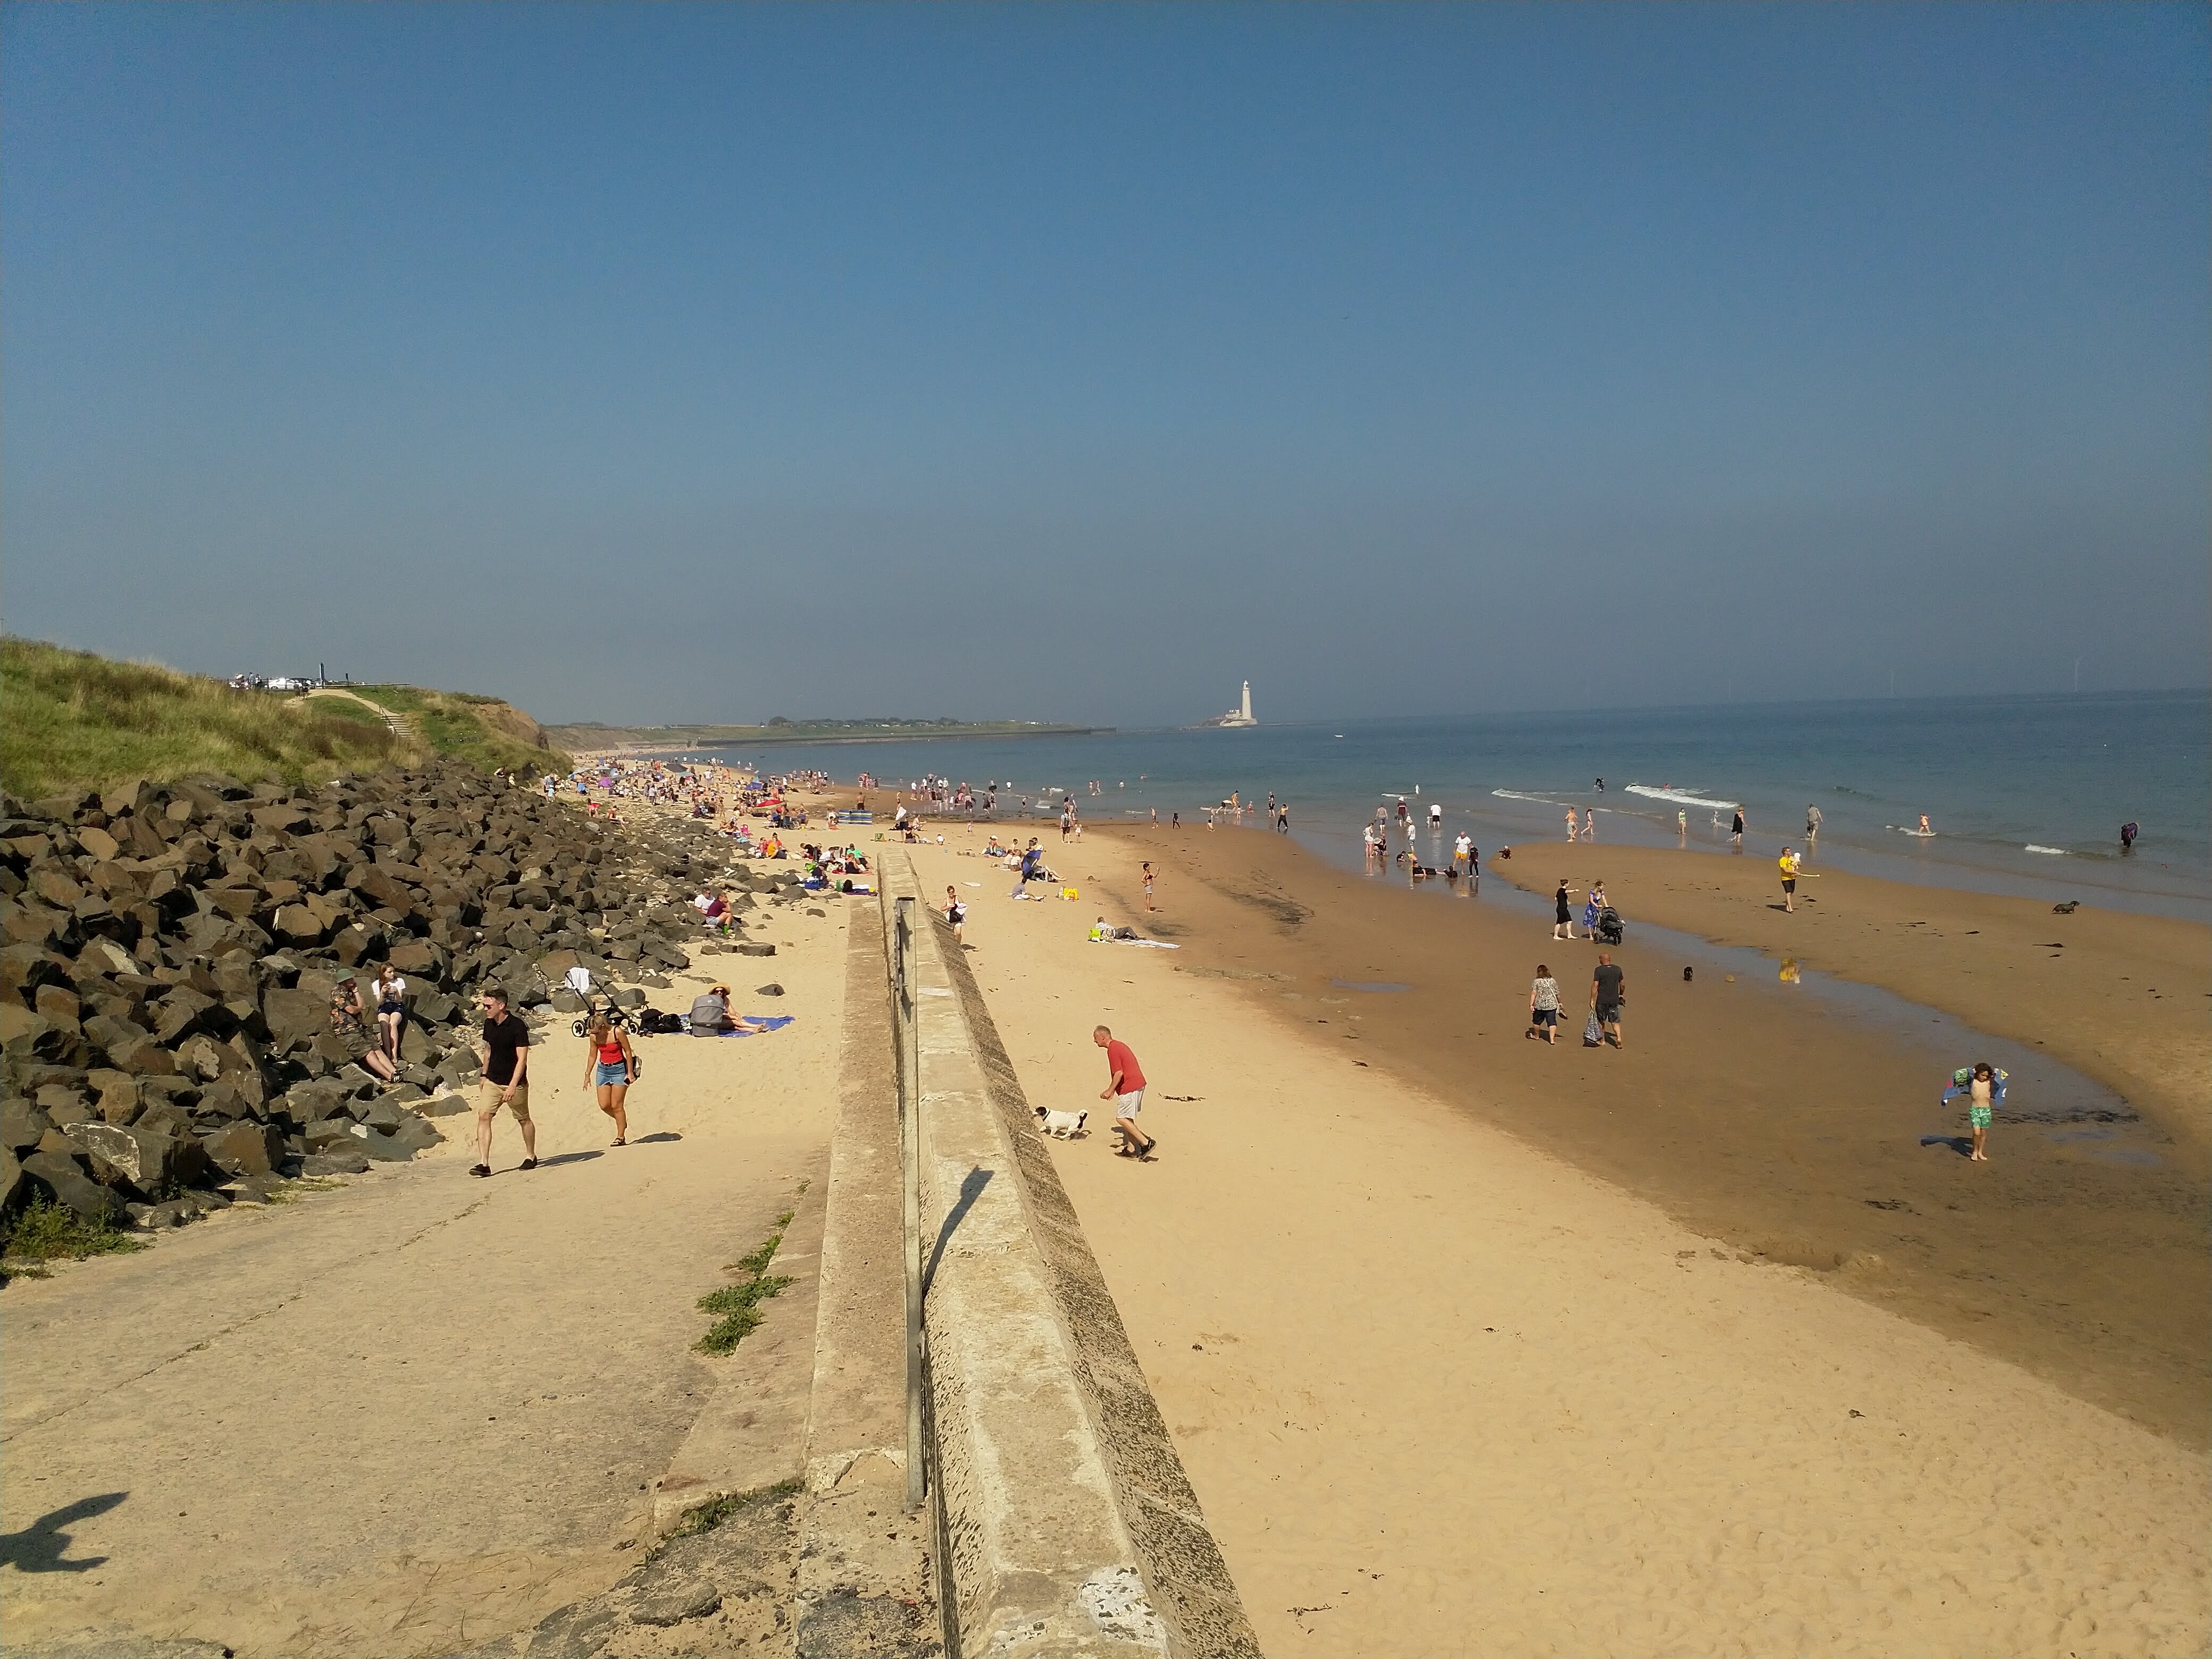 A beach crowded with people. There is a lighthouse in the far distance